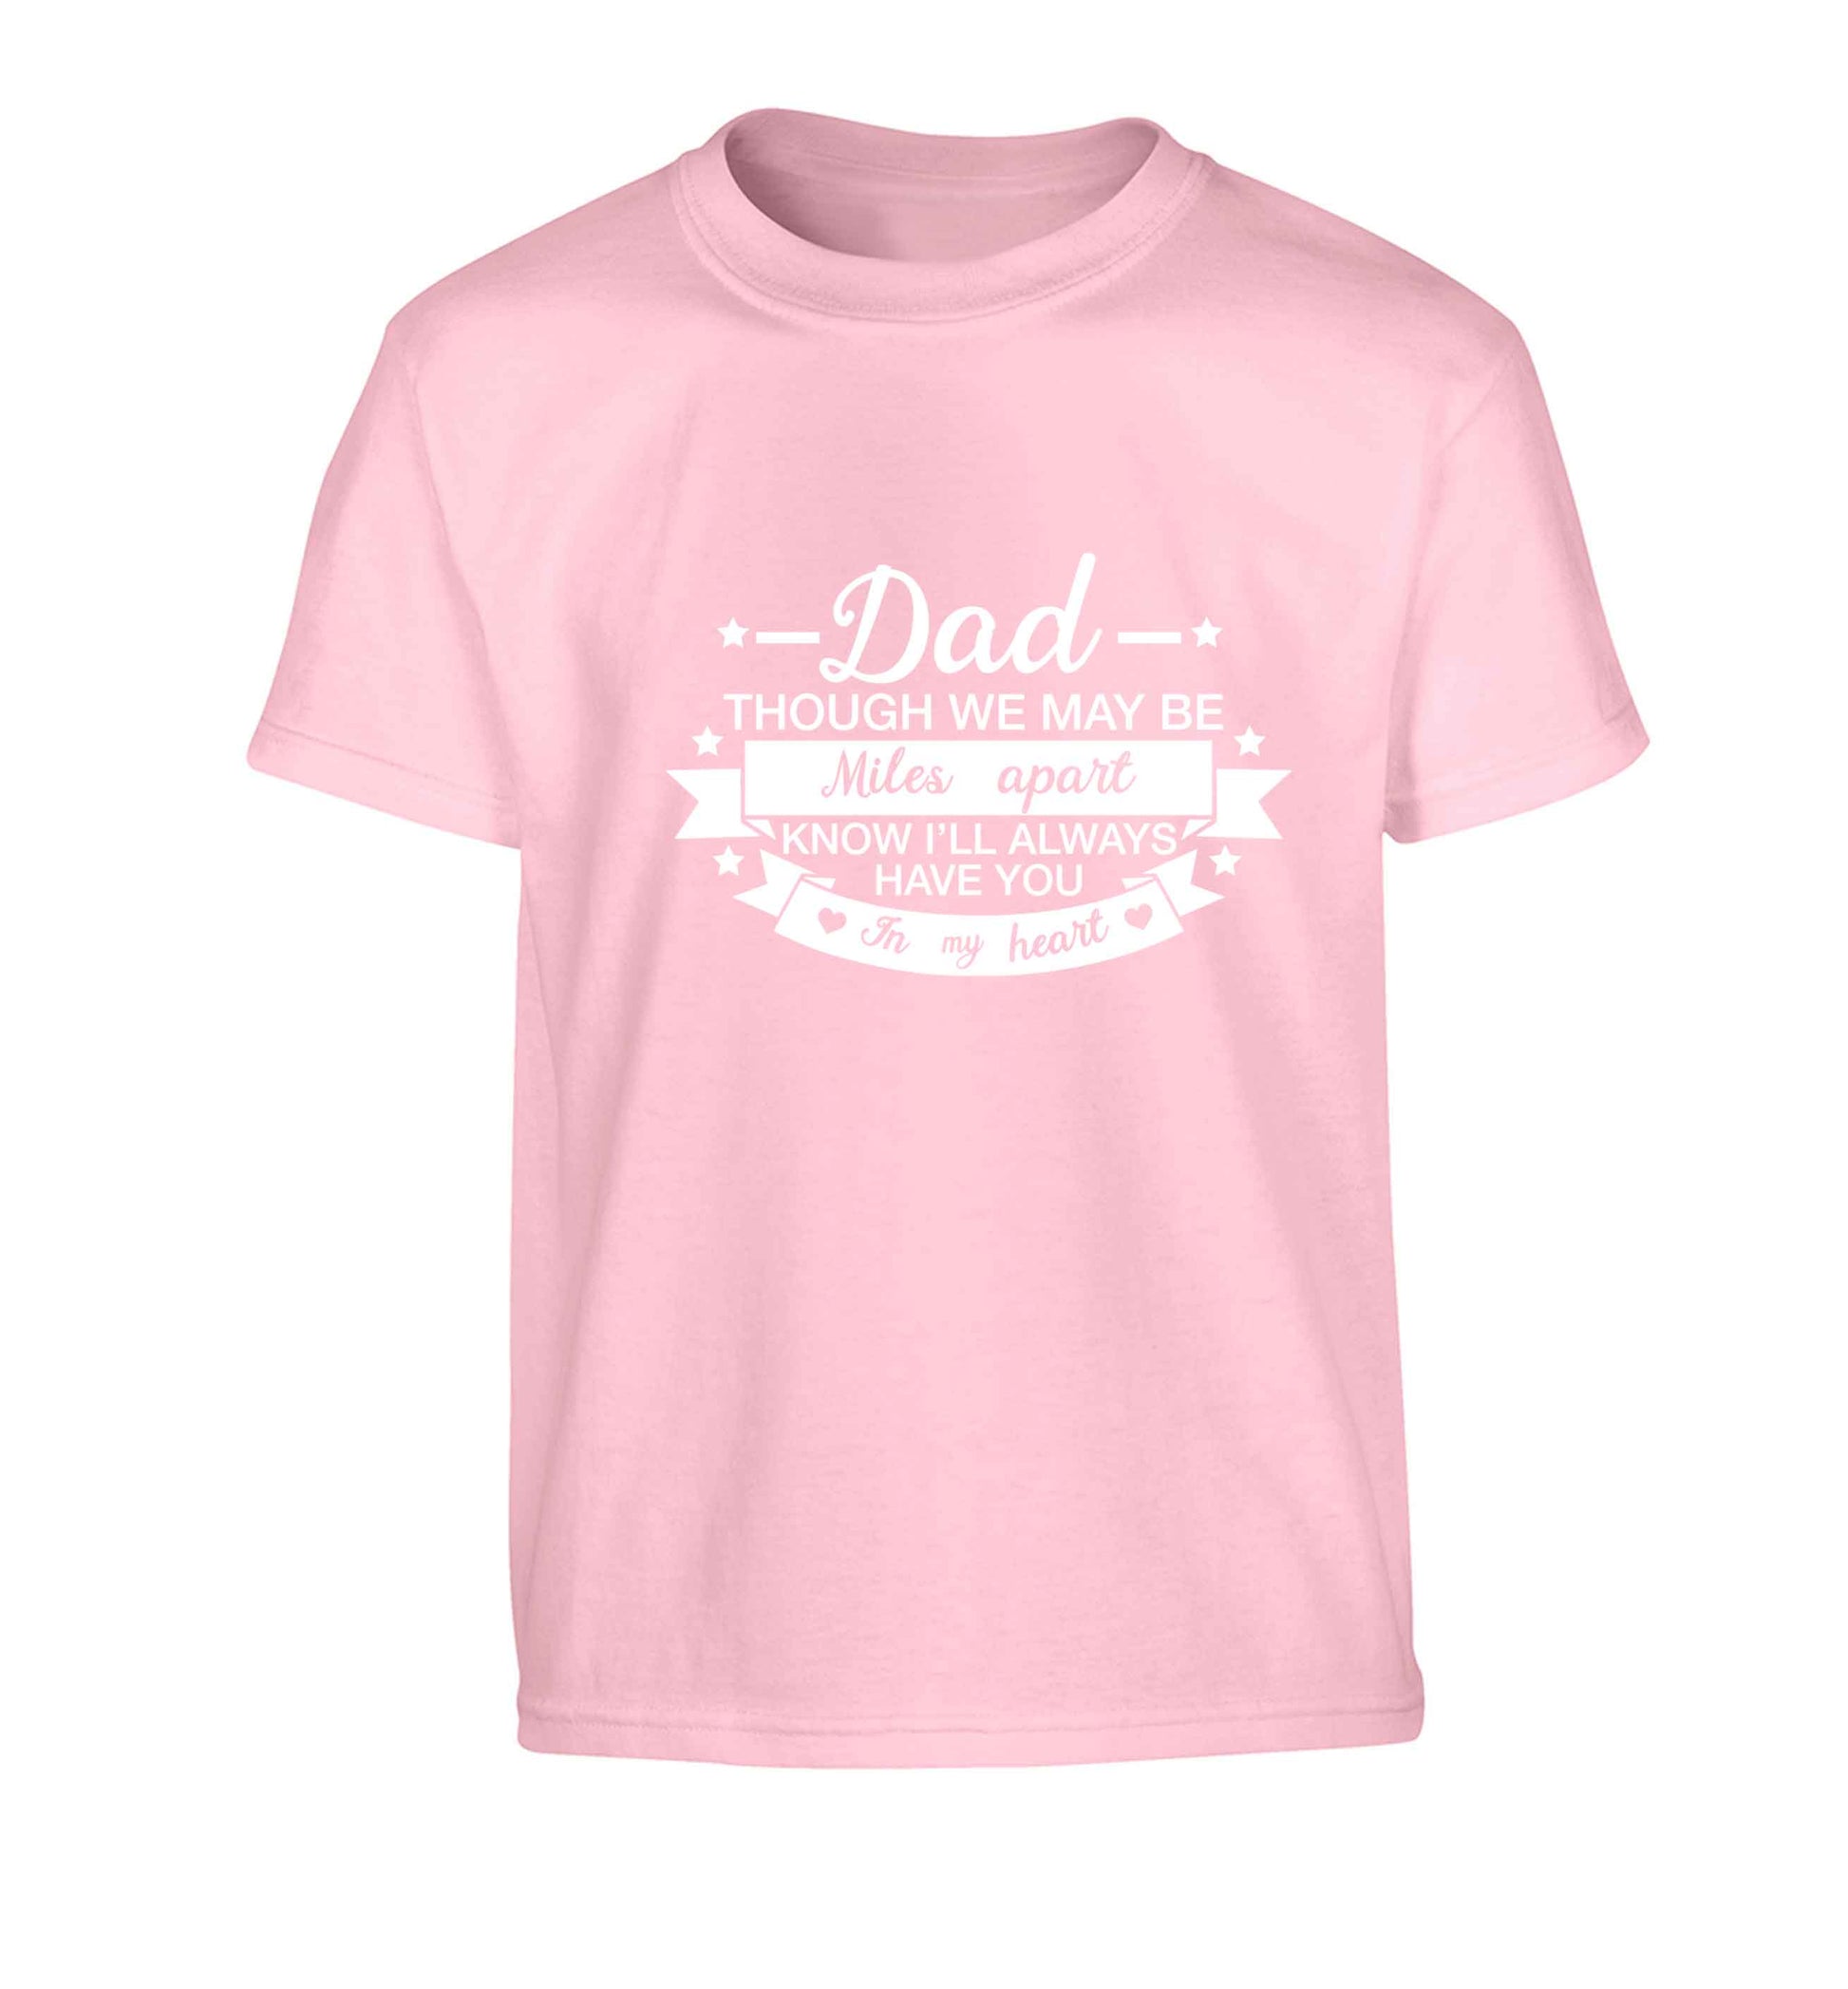 Dad though we are miles apart know I'll always have you in my heart Children's light pink Tshirt 12-13 Years